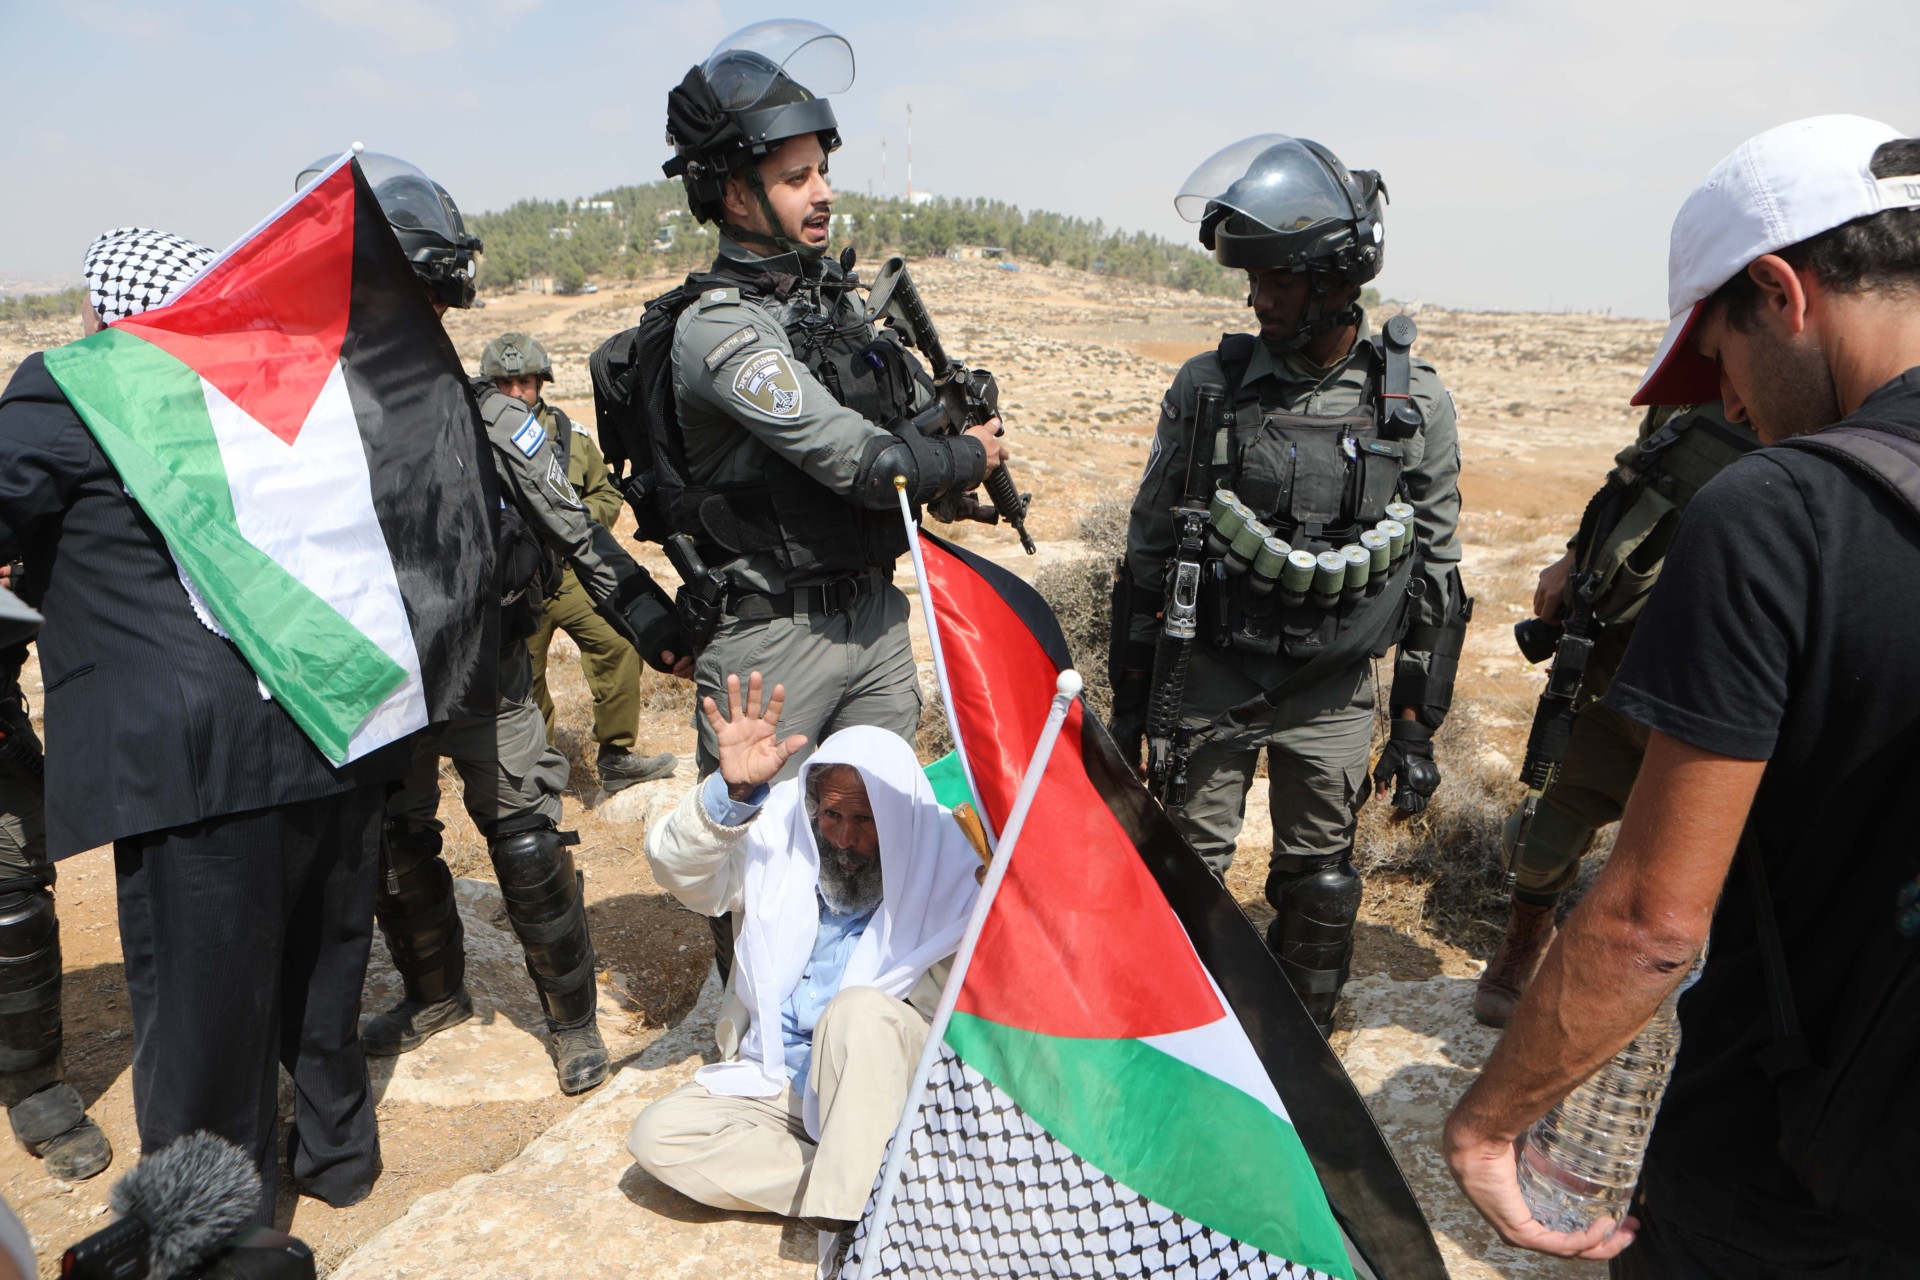 Protest against Jewish settlements in West Bank|TOPSHOT-PALESTINIAN-ISRAEL-CONFLICT